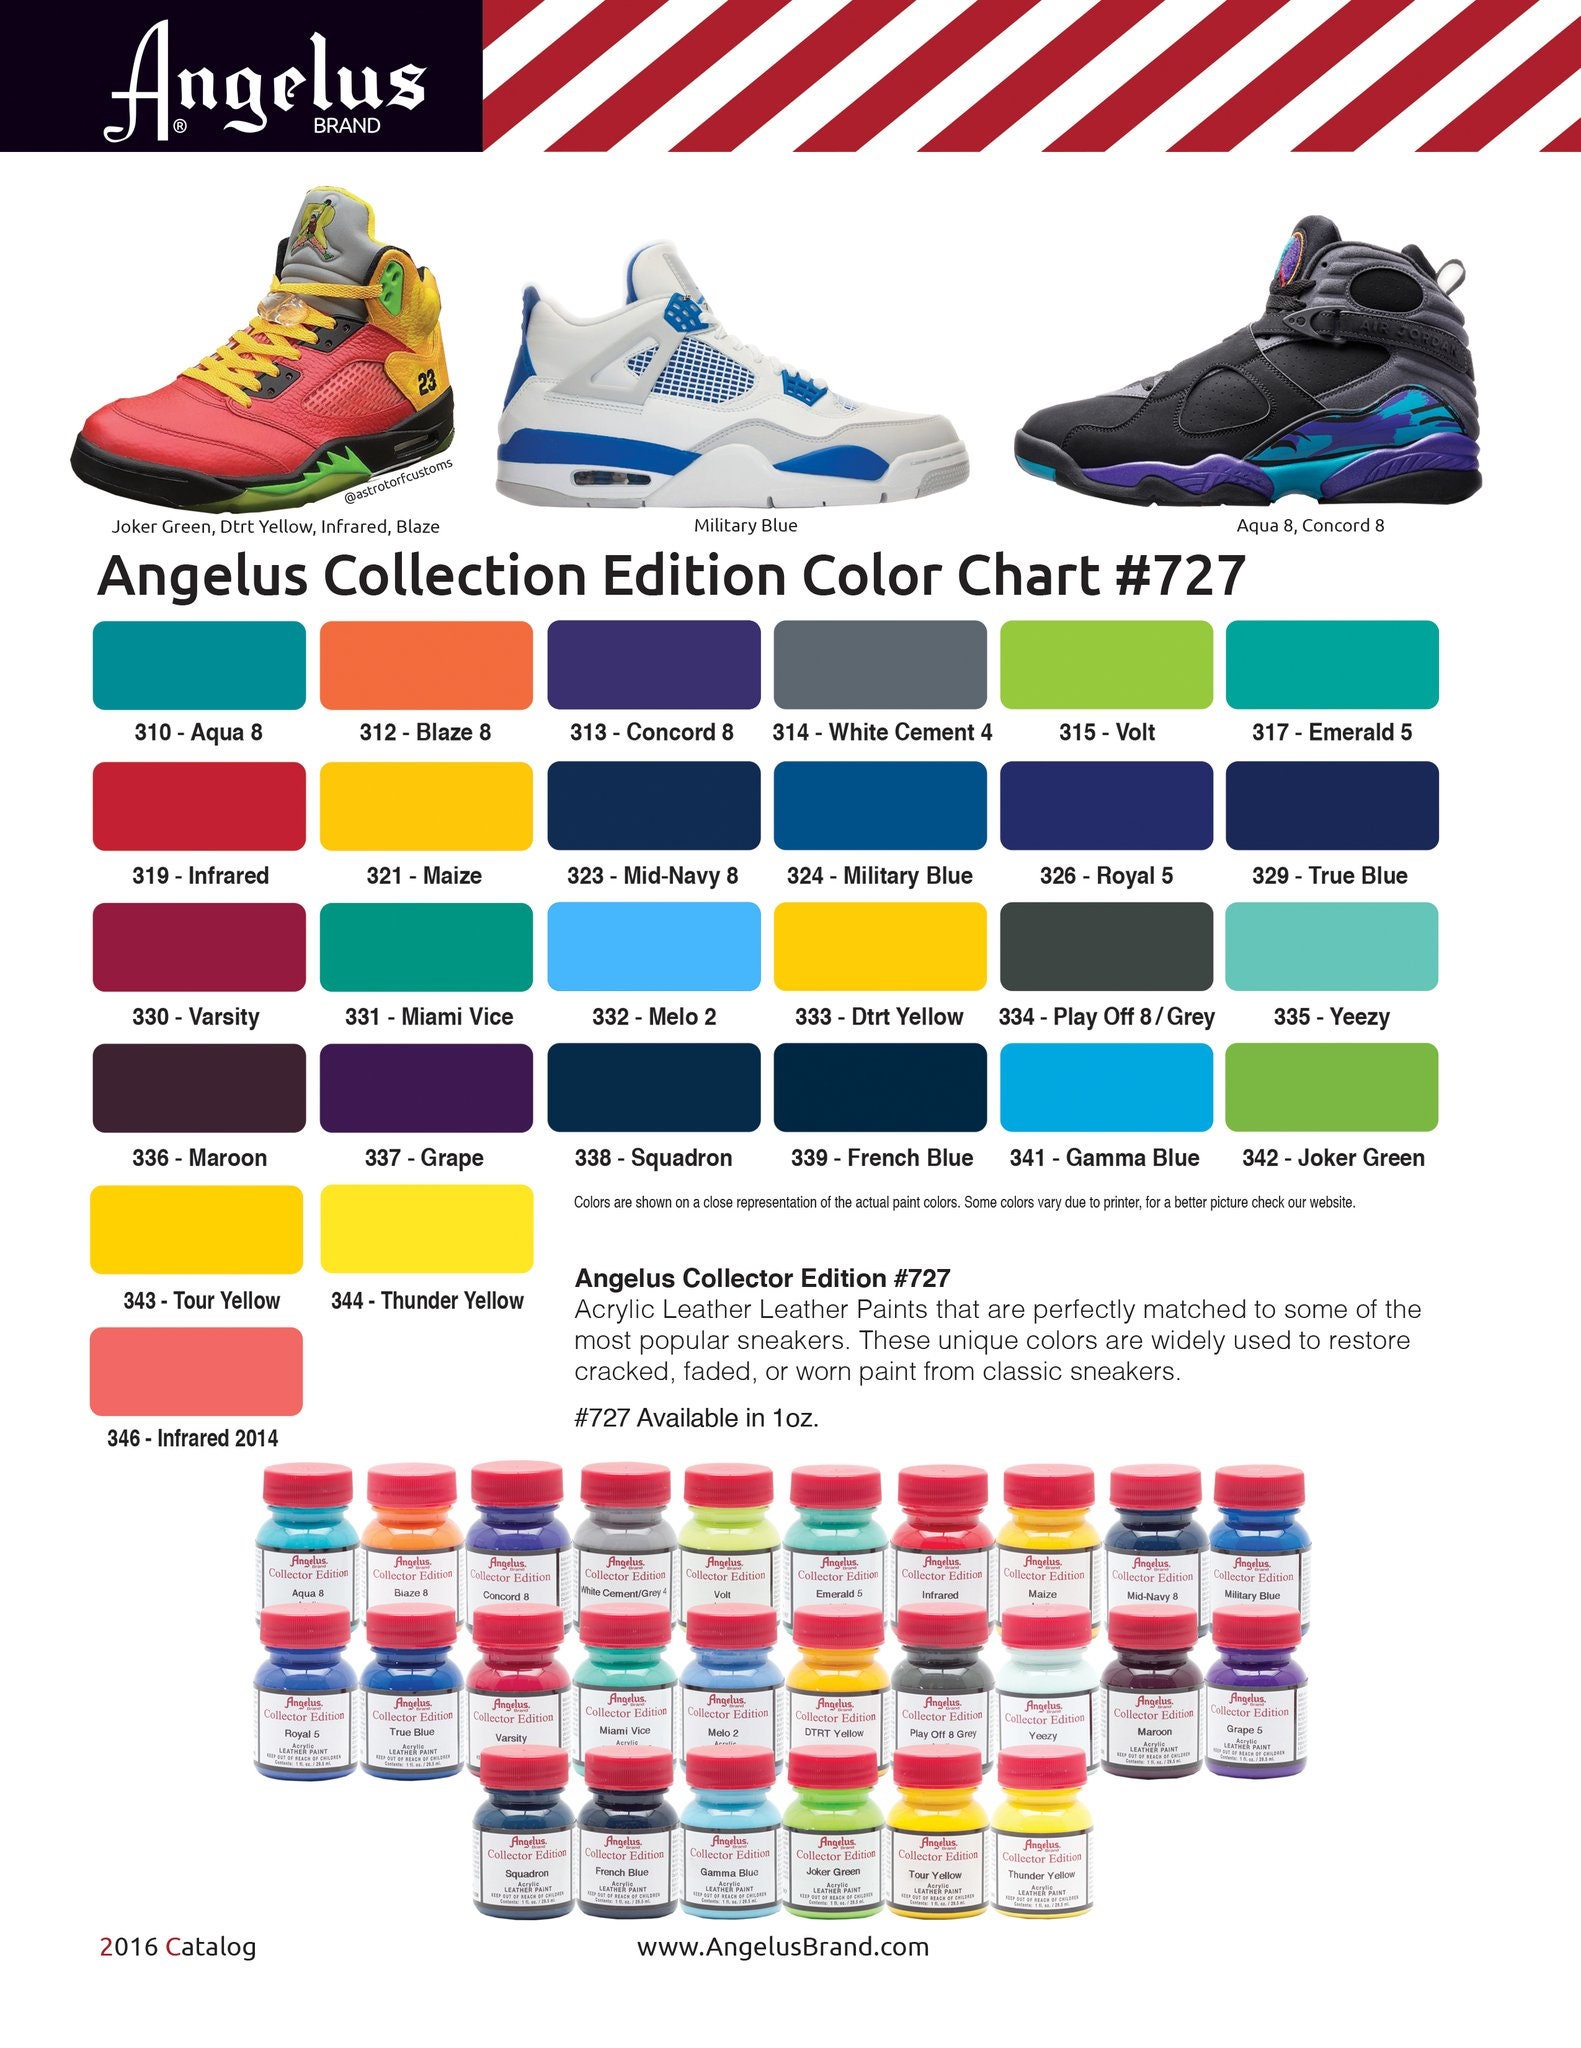 Angelus Leather Paint 4oz Starter Kit Set of Acrylic Paints For Sneakers,  Shoes, Art, Crafts, Jackets, Shirts- Flexible, Made in USA